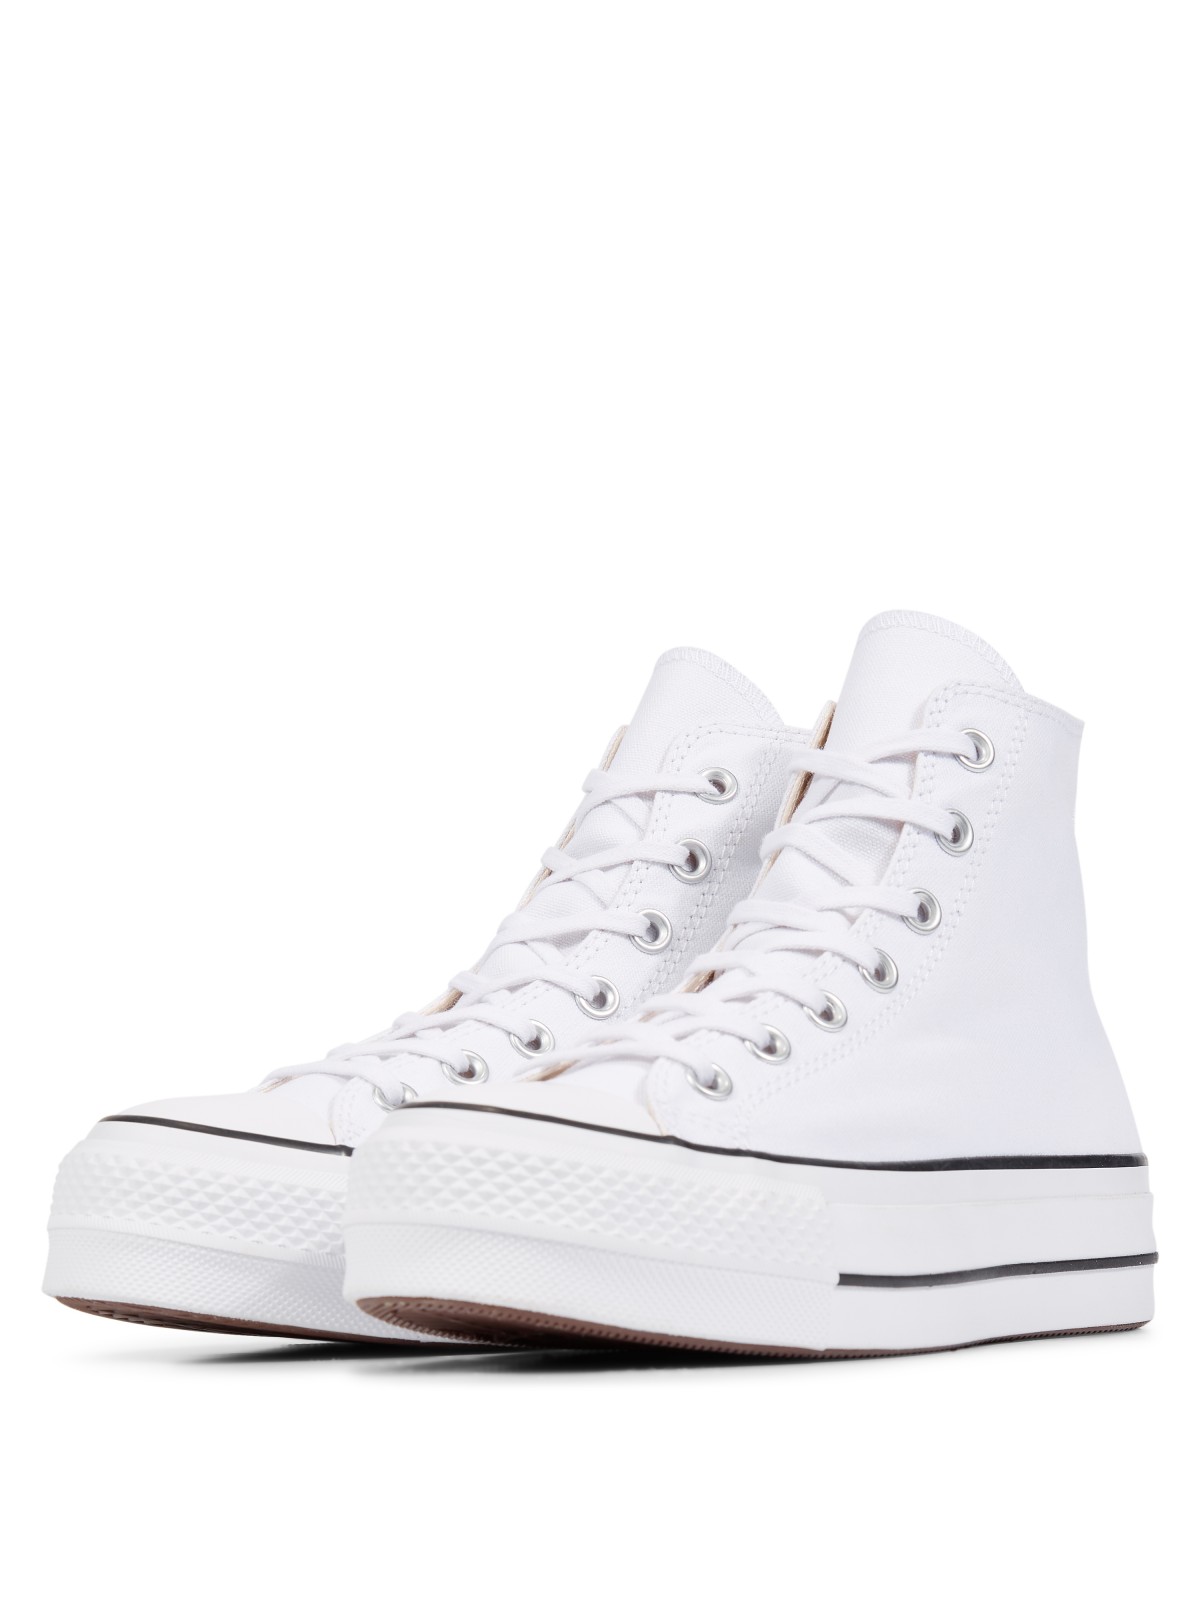 Converse Chuck Taylor all star Lift toile plateforme blanc